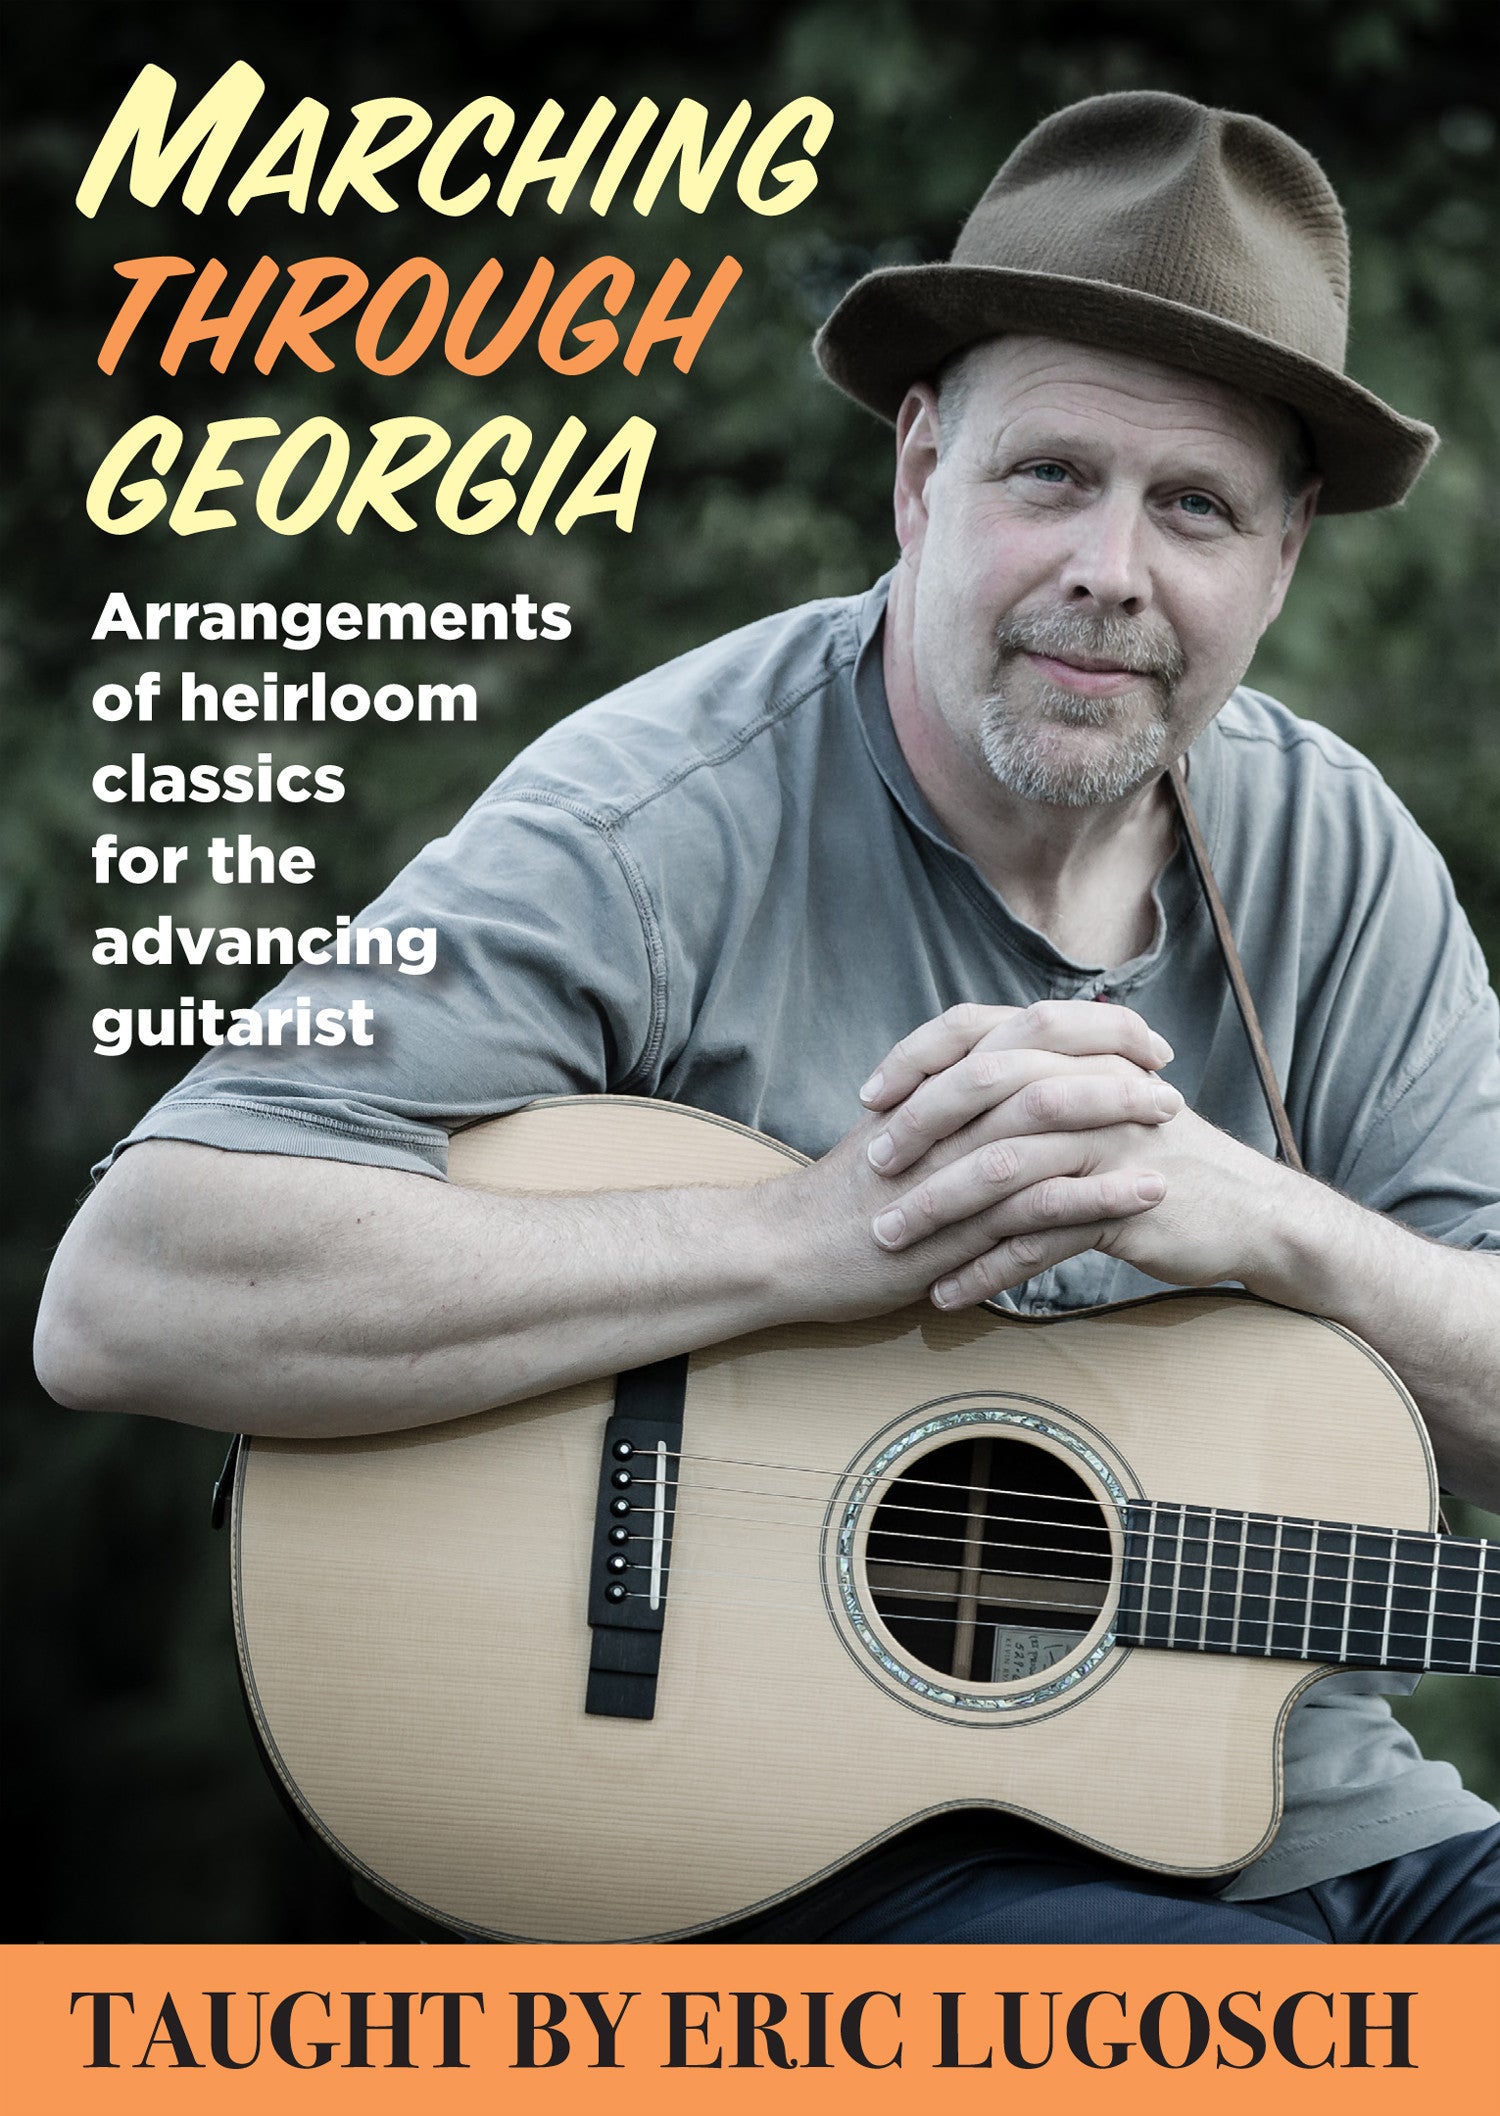 Image 1 of Marching Through Georgia - Arrangements of Heirloom Classics for the Advancing Guitarist - SKU# 304-DVD1059 : Product Type Media : Elderly Instruments